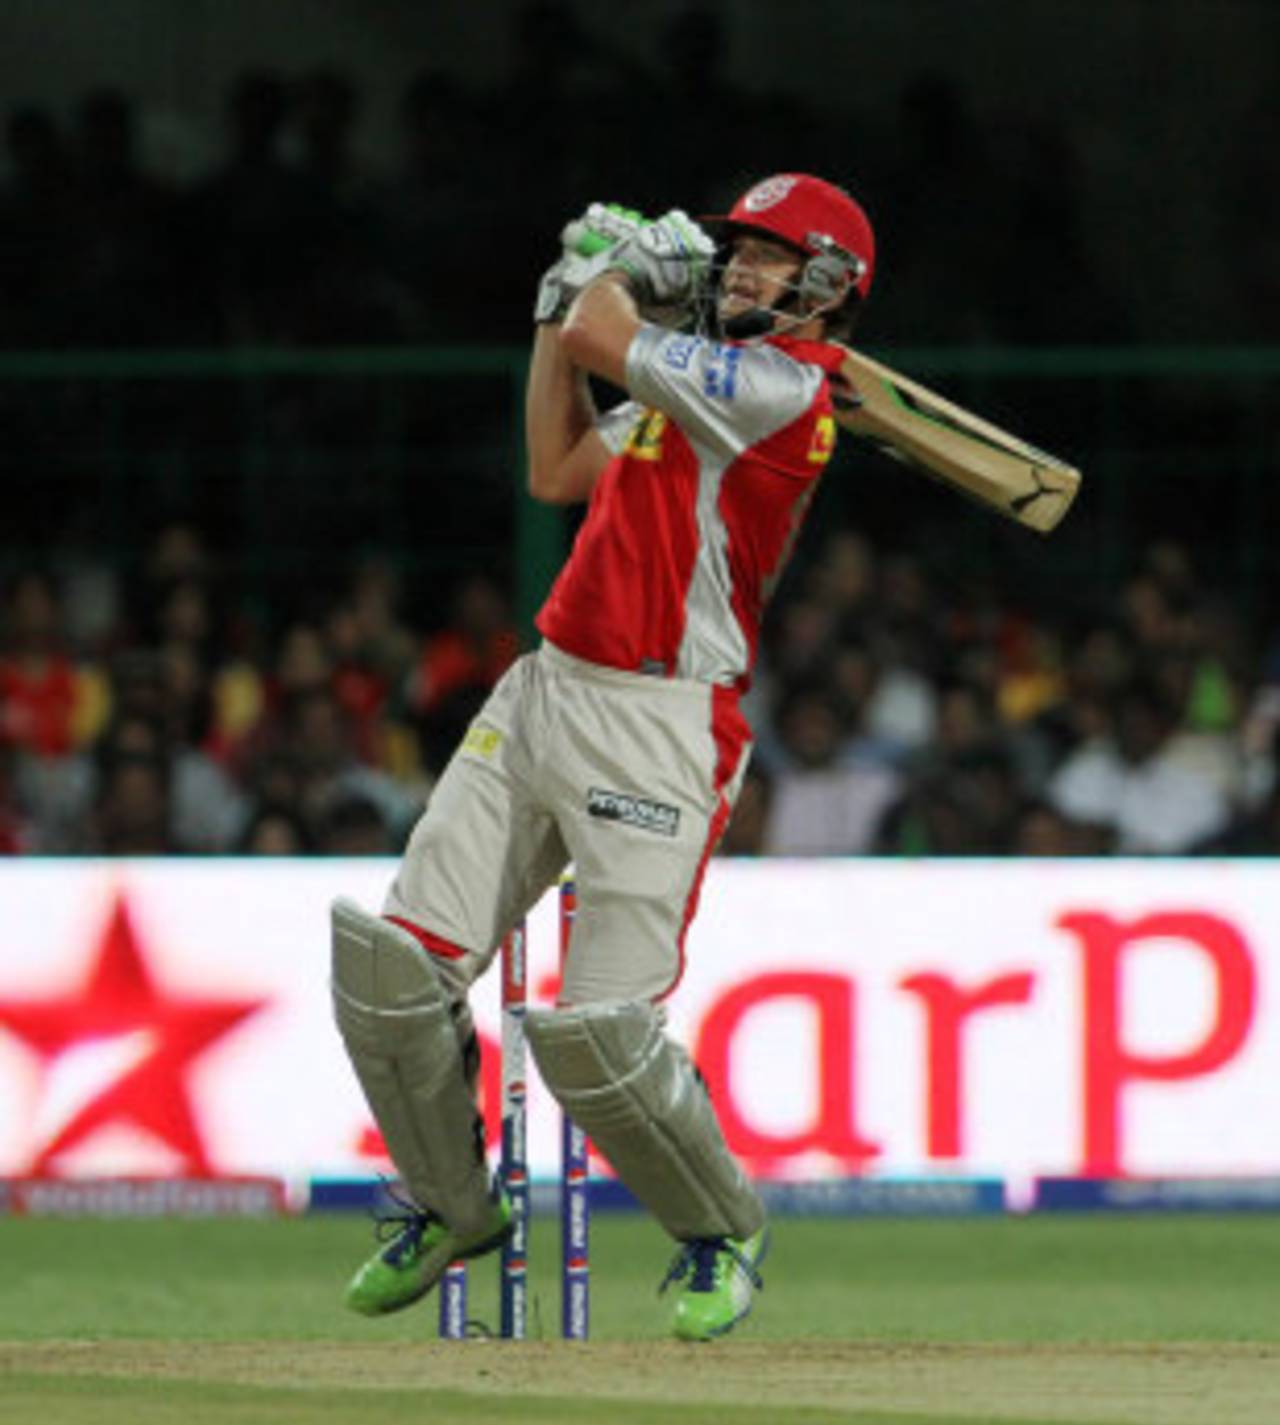 Adam Gilchrist plays a pull shot for four, Royal Challengers Bangalore v Kings XI Punjab, IPL 2013, Bangalore, May 14, 2013